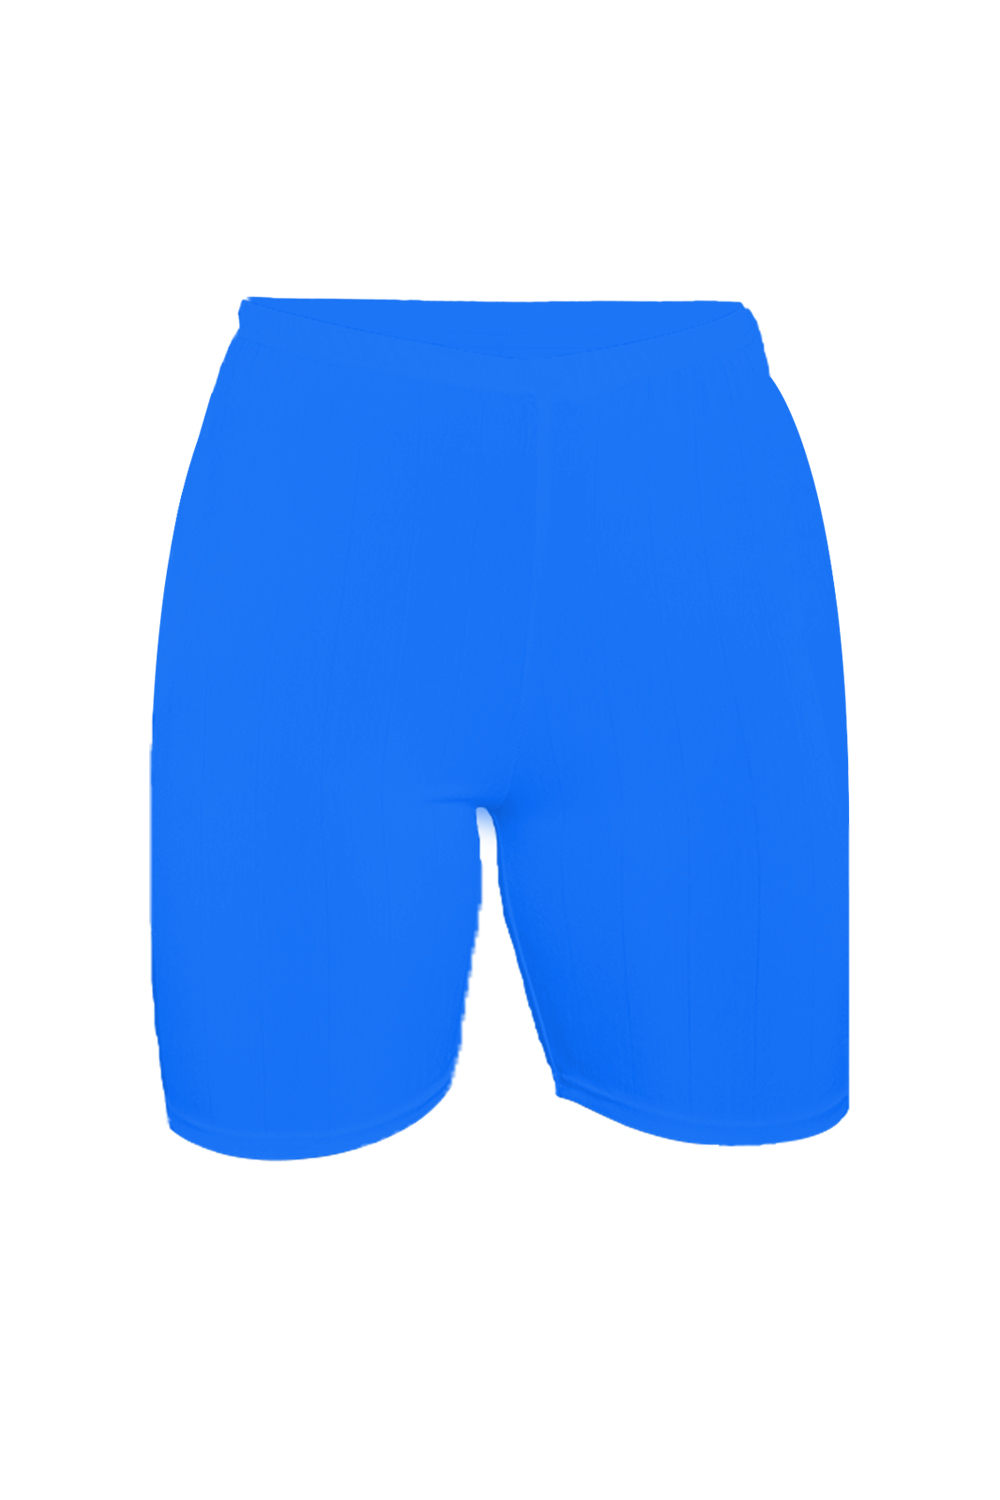 Crazy Chick Adult Royal Blue Microfibre Cycling Shorts for Sports and Gym